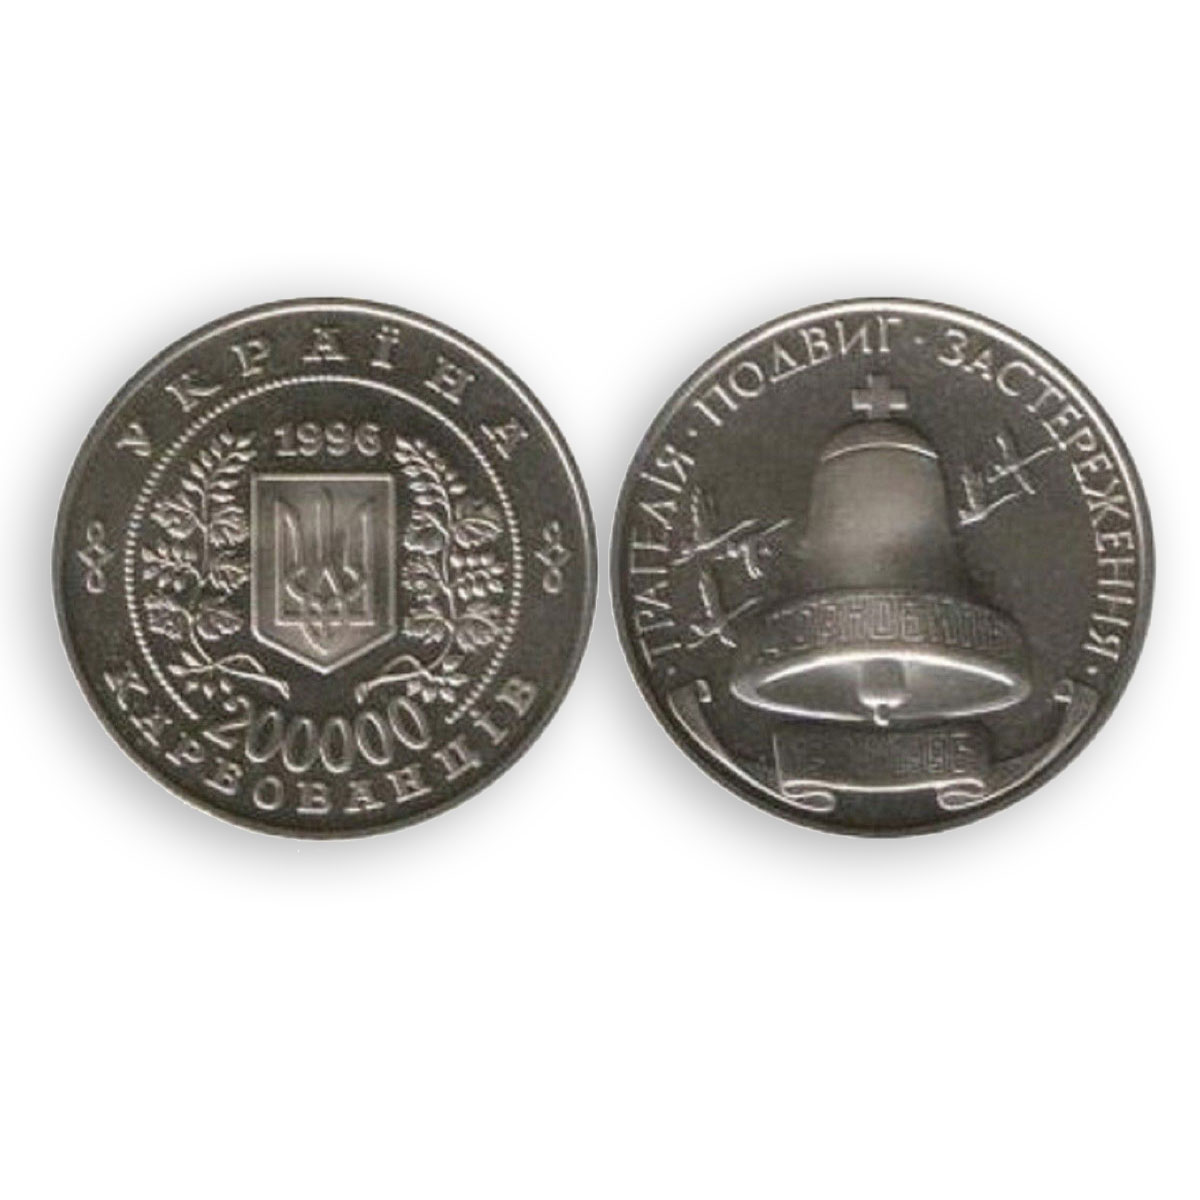 WHOLESALE! 10x Ukraine, 200000 karbovanets, 10 years of Chornobyl disaster, 1996